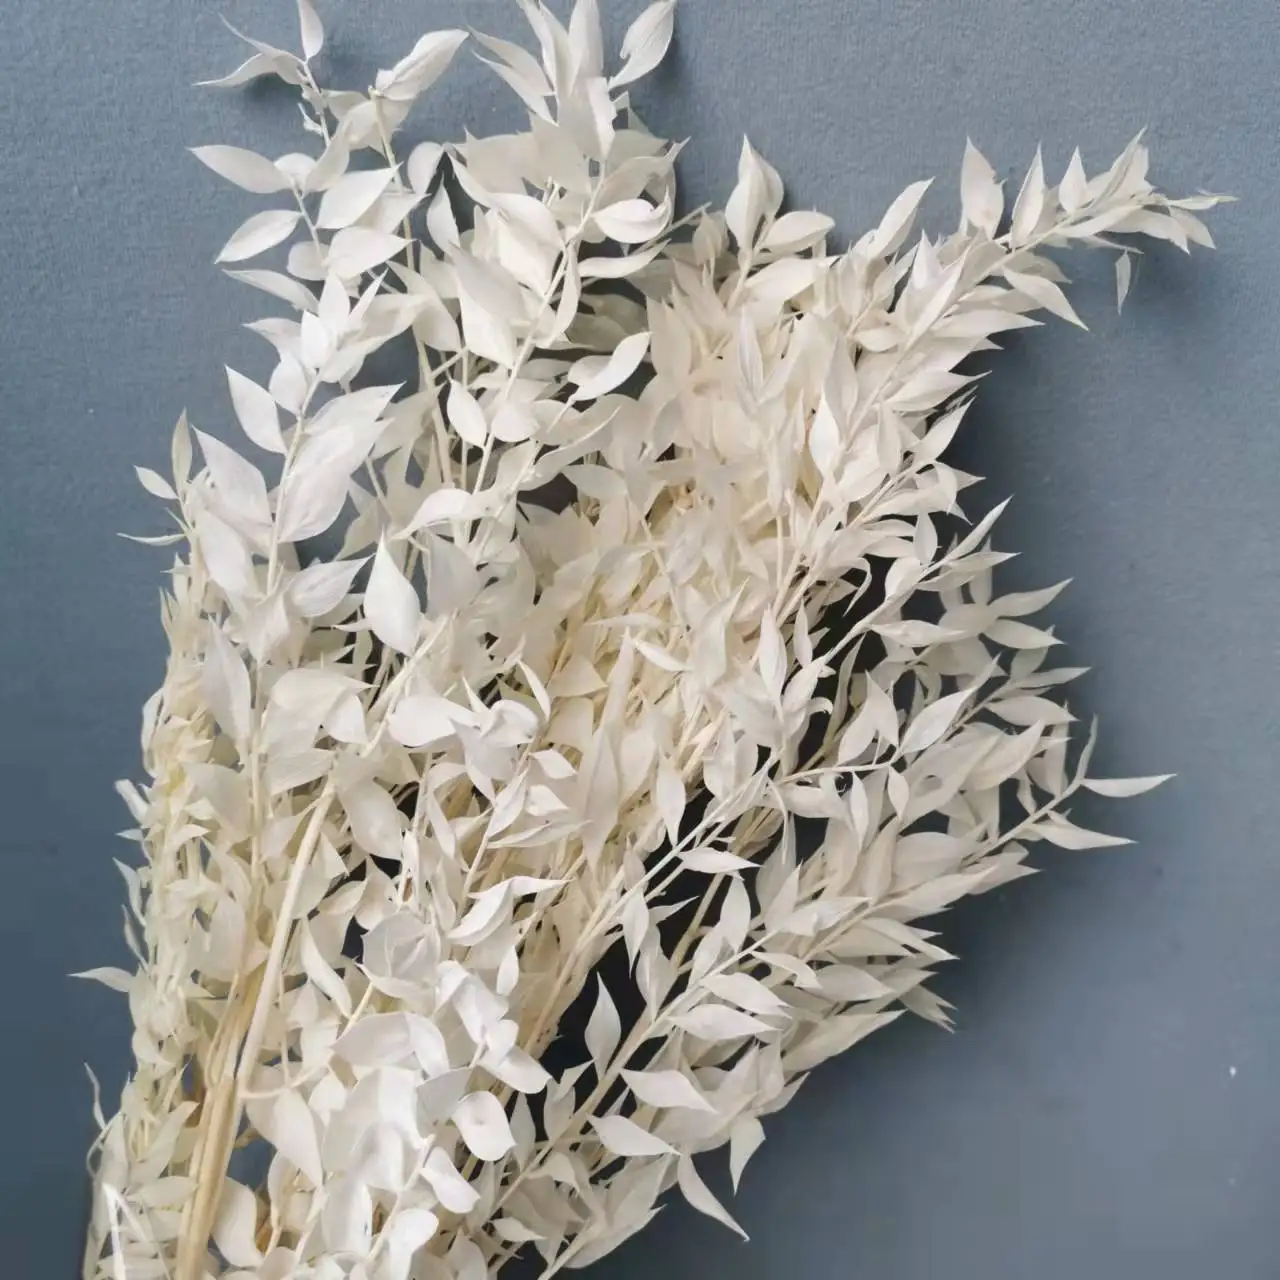 

30g/40cm,Natural Dried flowers white Fugui Leaves Branches,Display bouquet de mariage flowers Wedding Home fall Decorations